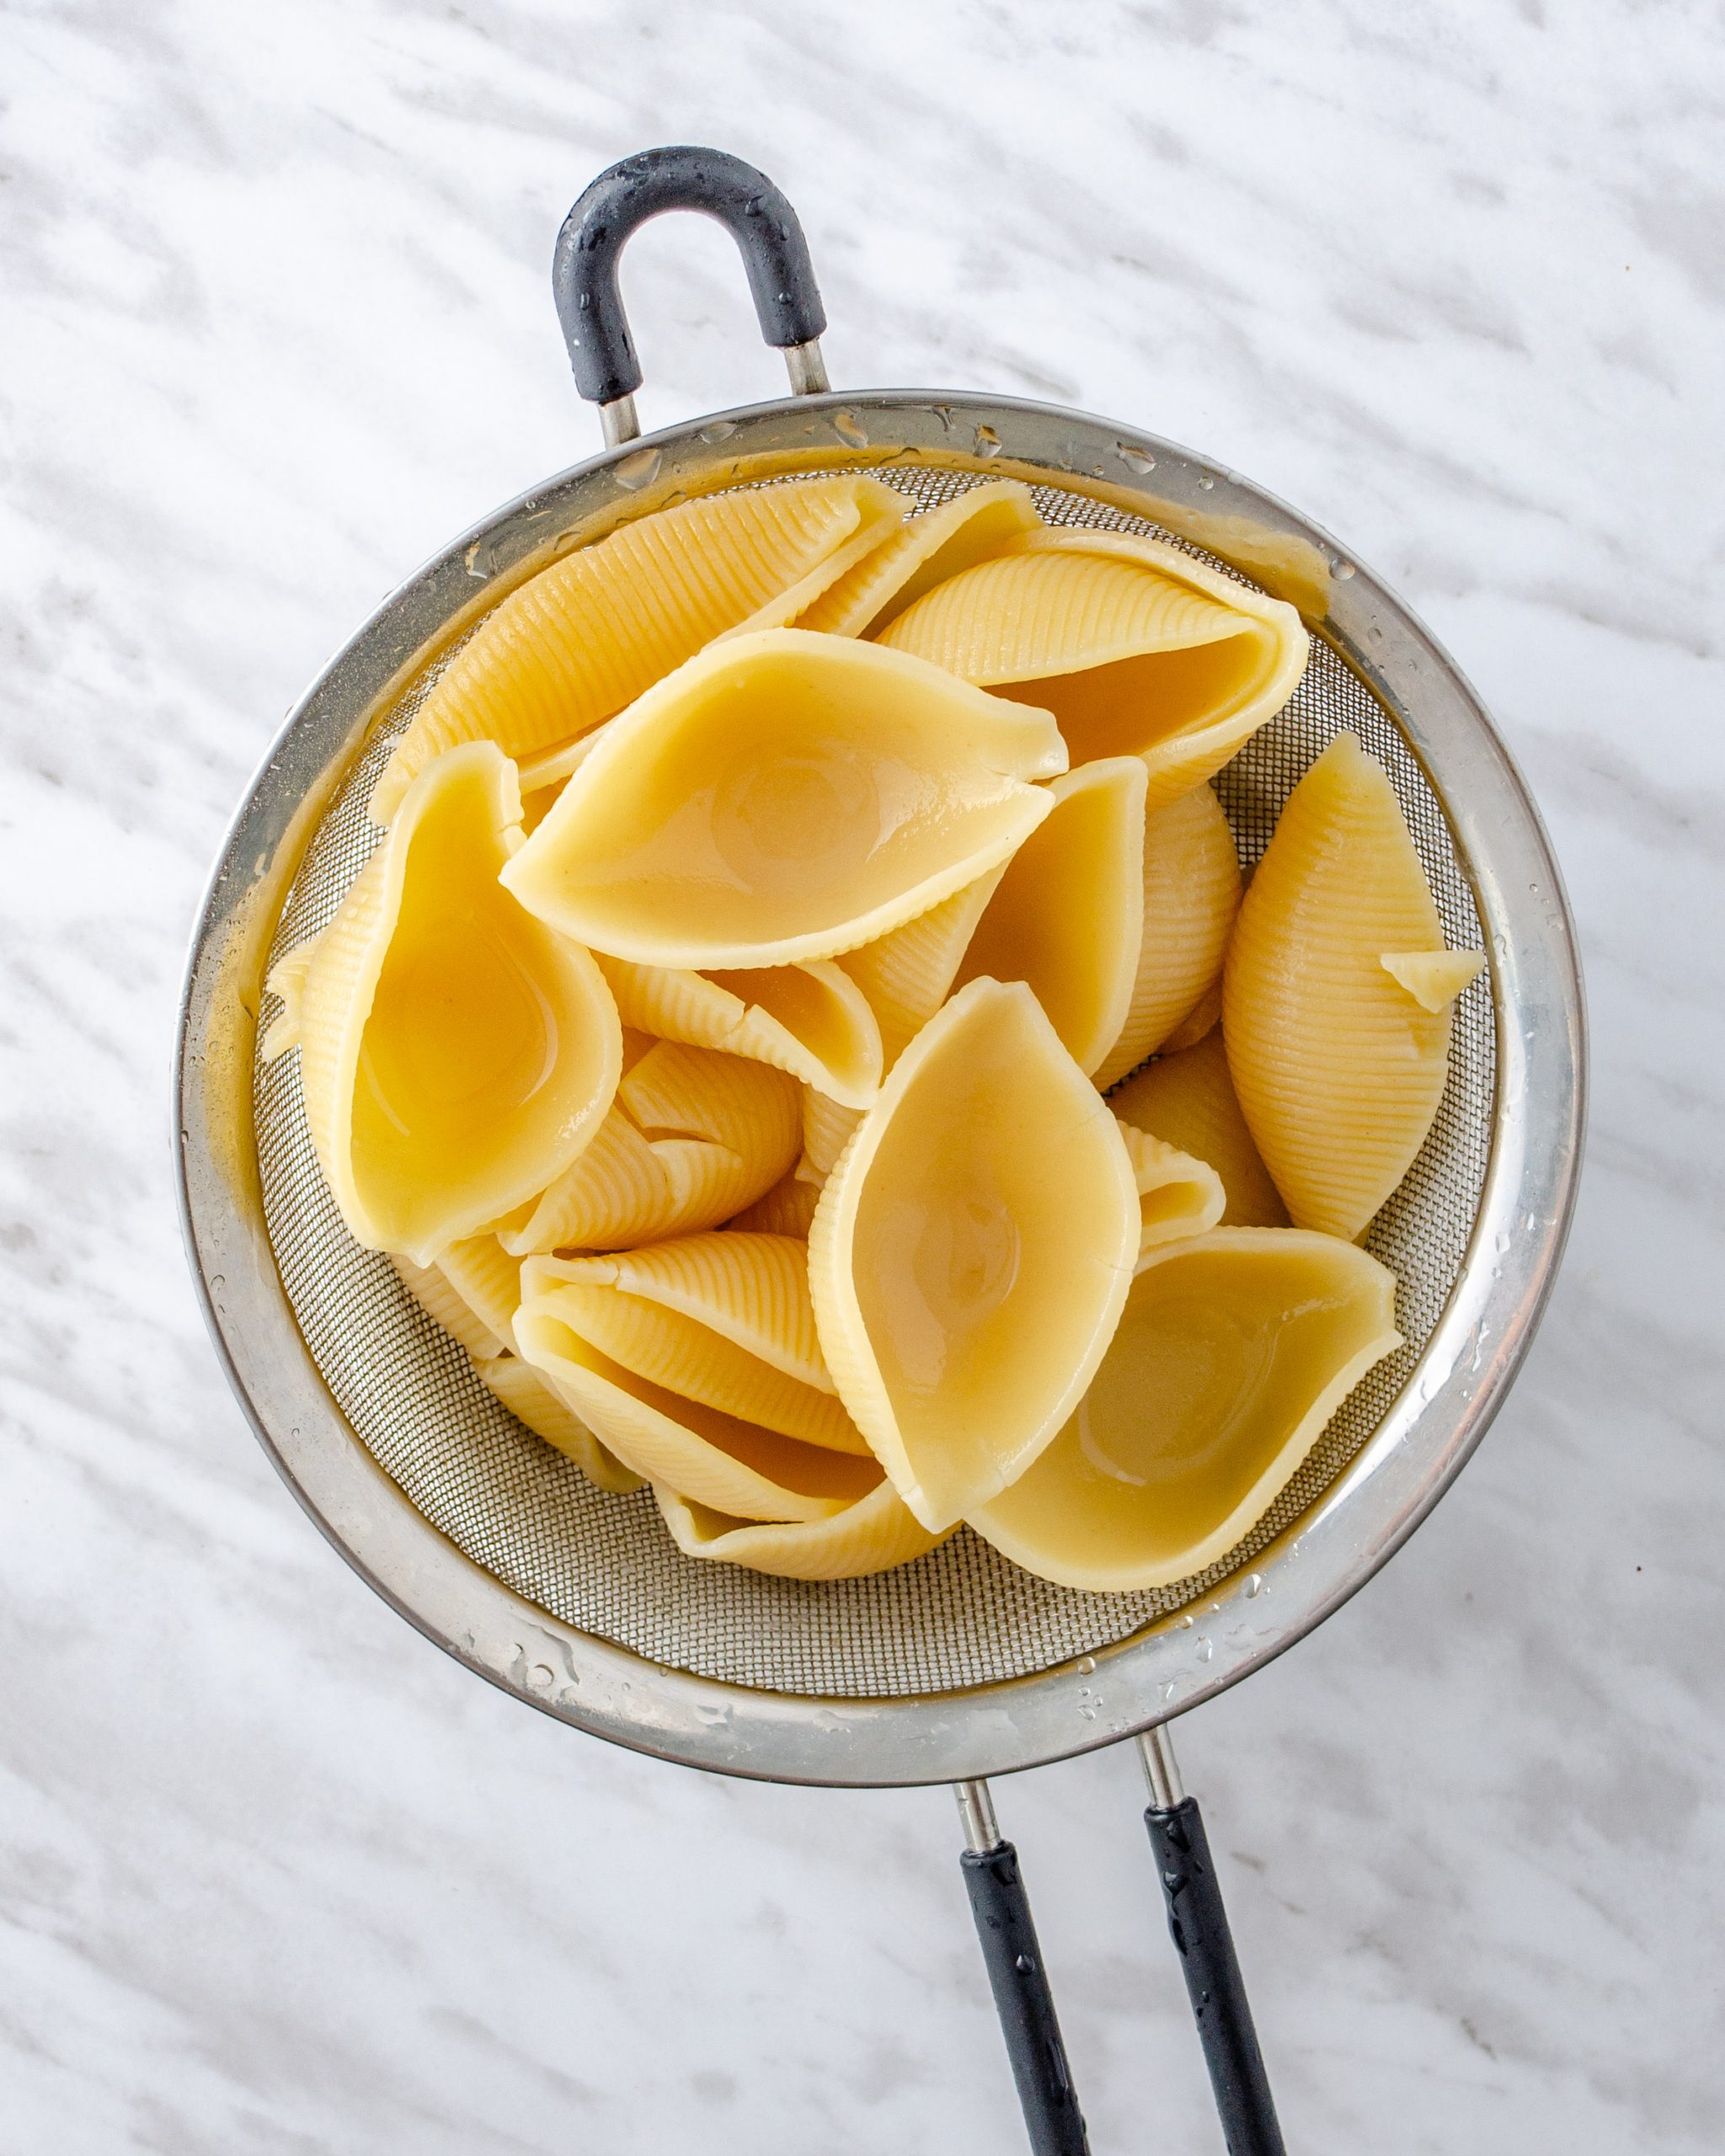 Boil the jumbo shell pasta until al dente, drain, and rinse in cold water to keep the noodles from sticking together.